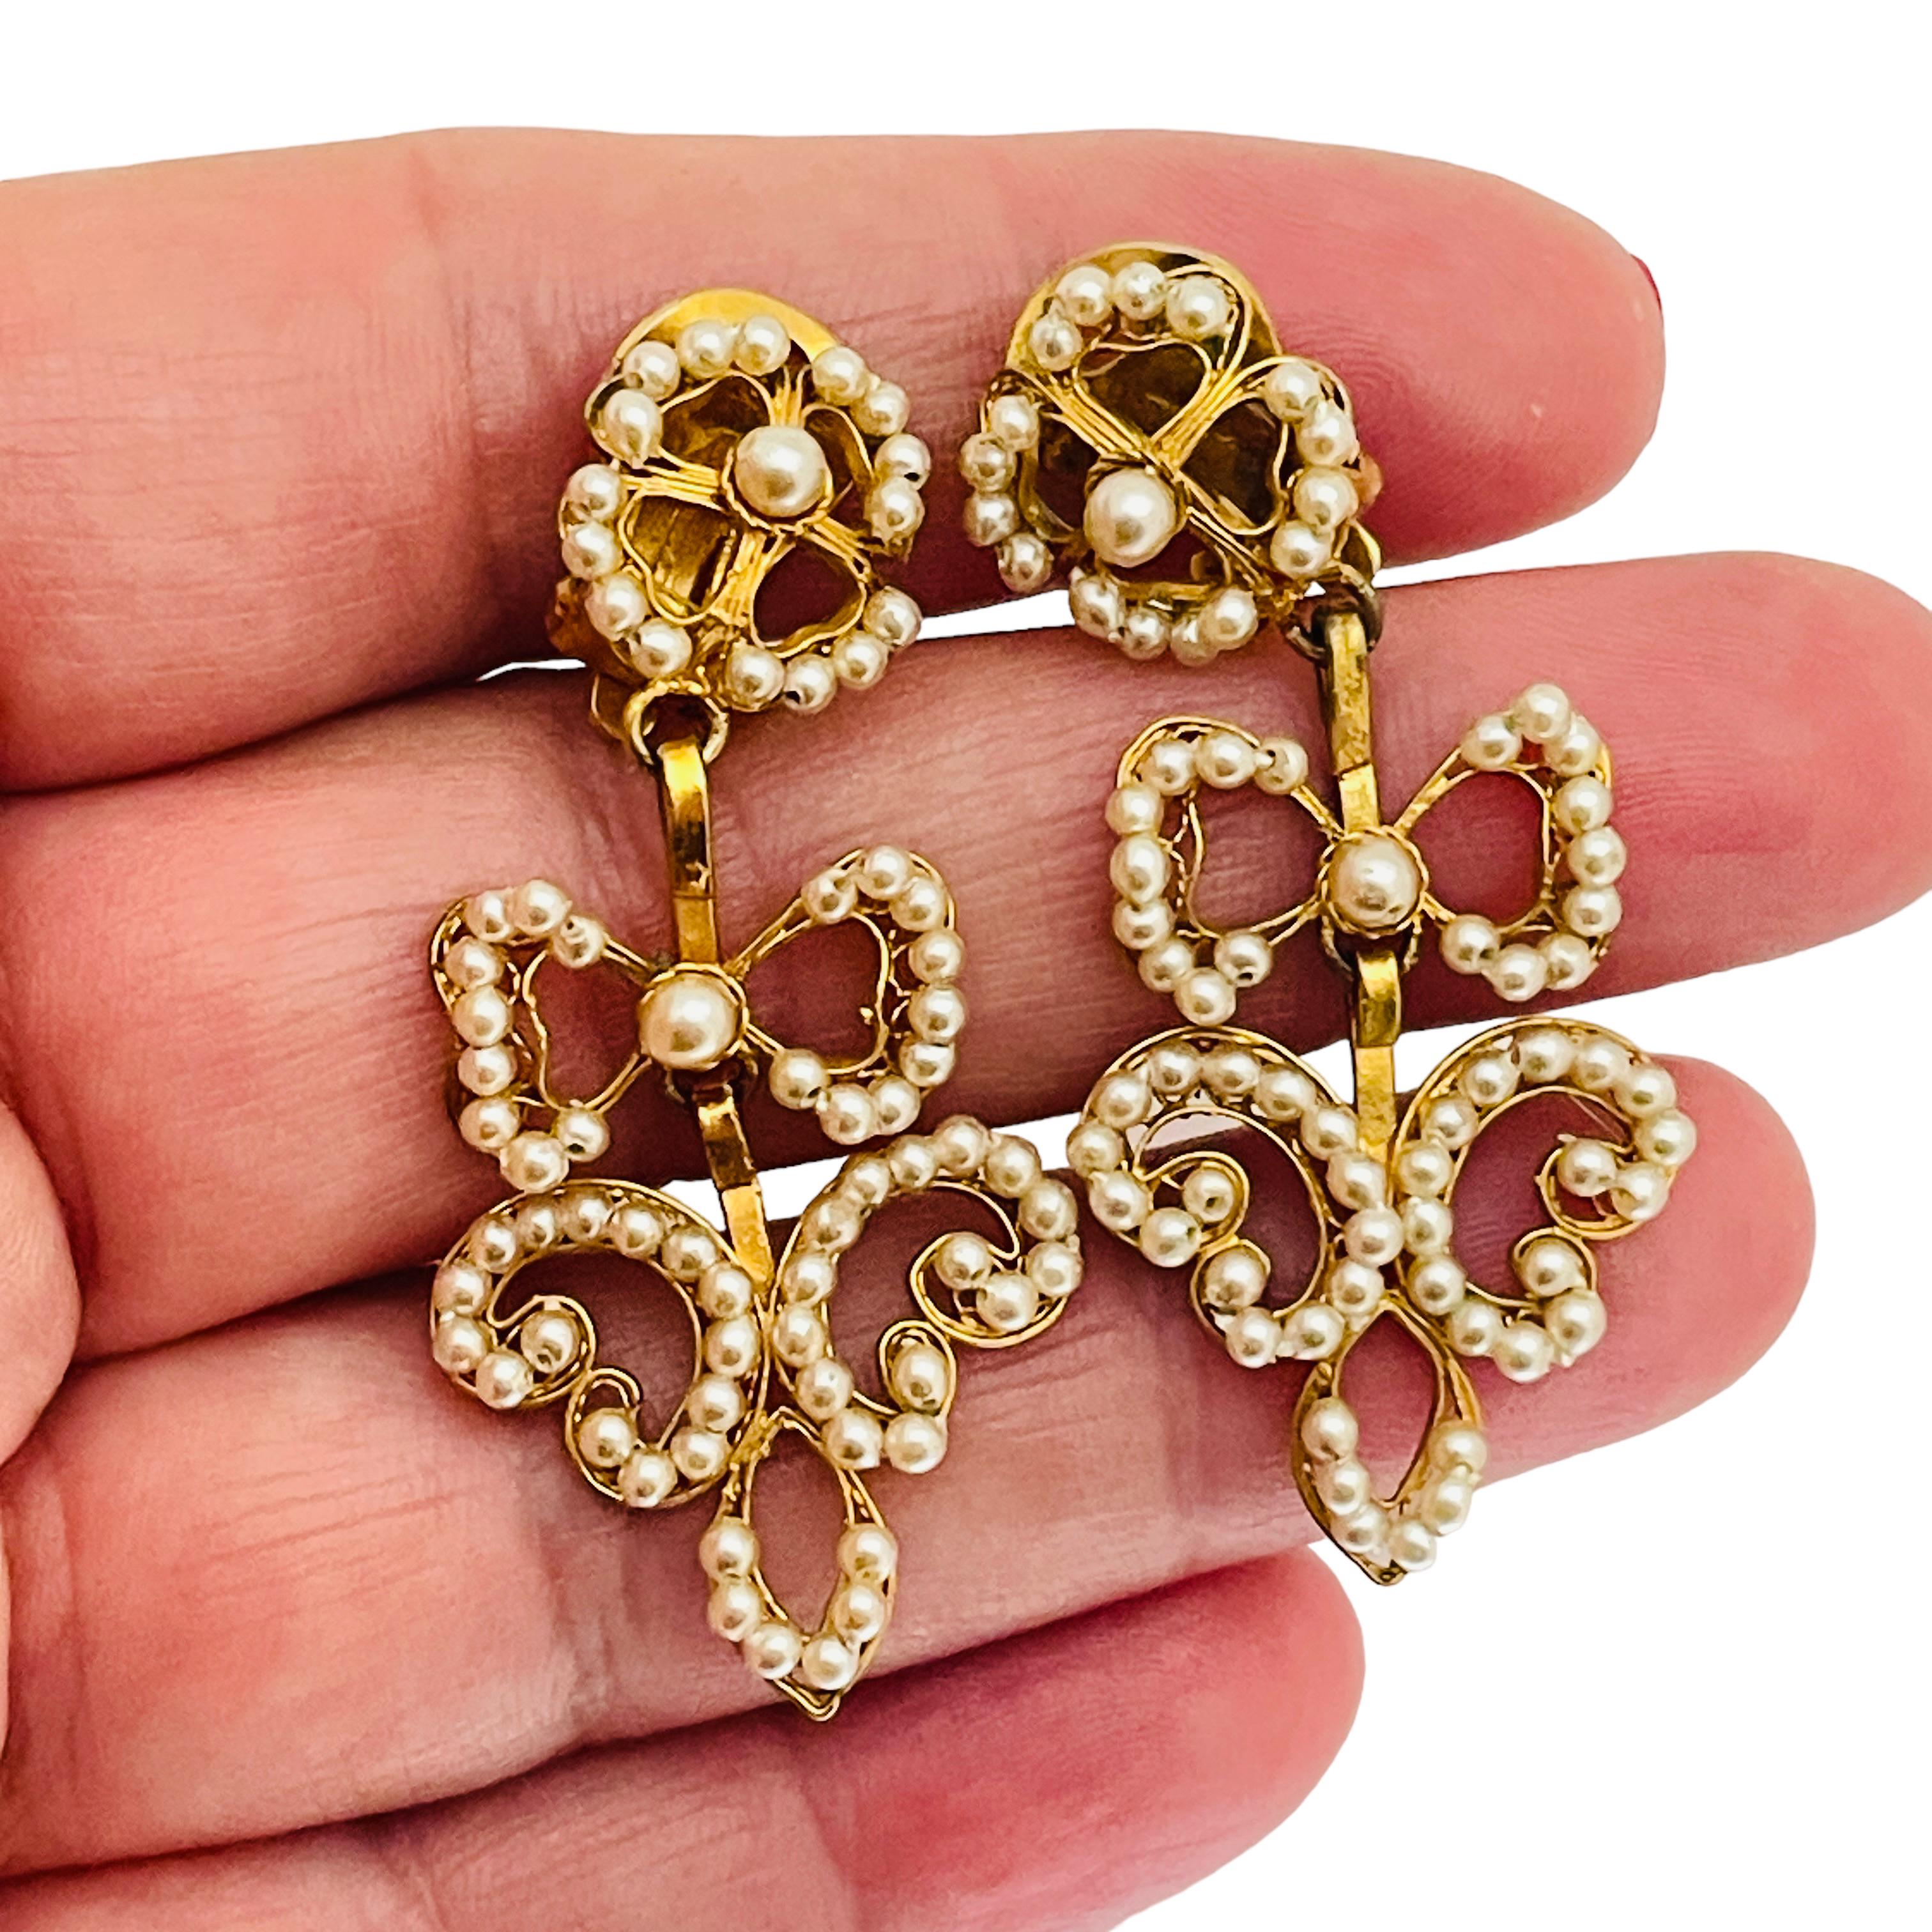 Vintage gold micro pearl bow drop clip on earrings   In Excellent Condition For Sale In Palos Hills, IL